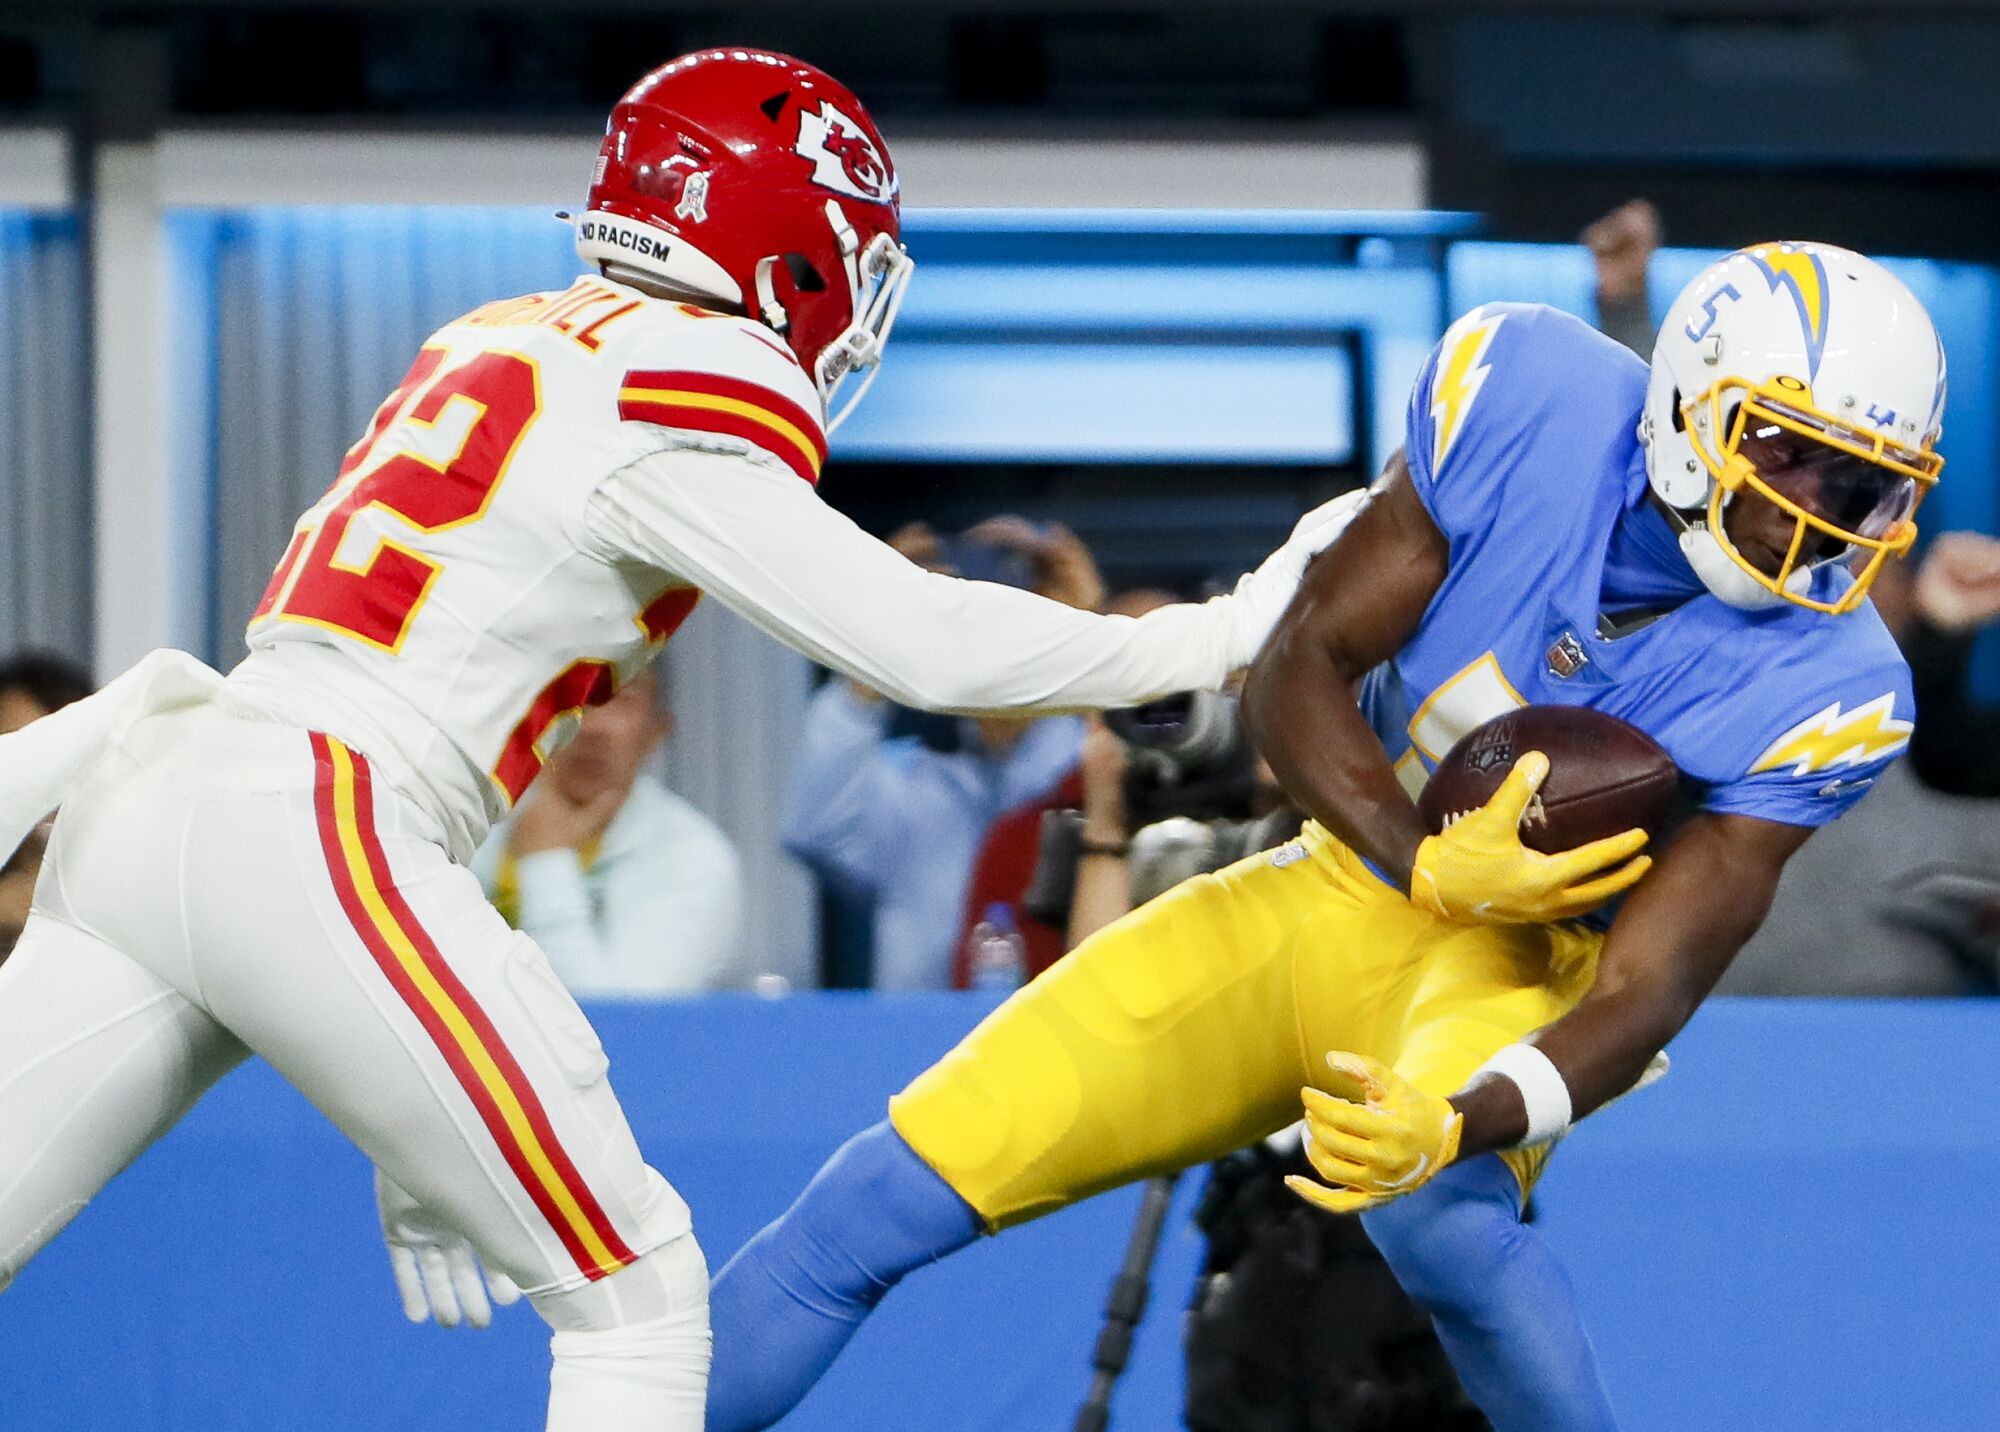 Chargers wide receiver Joshua Palmer catches a pass for a touchdown in front on Chiefs safety Juan Thornhill.